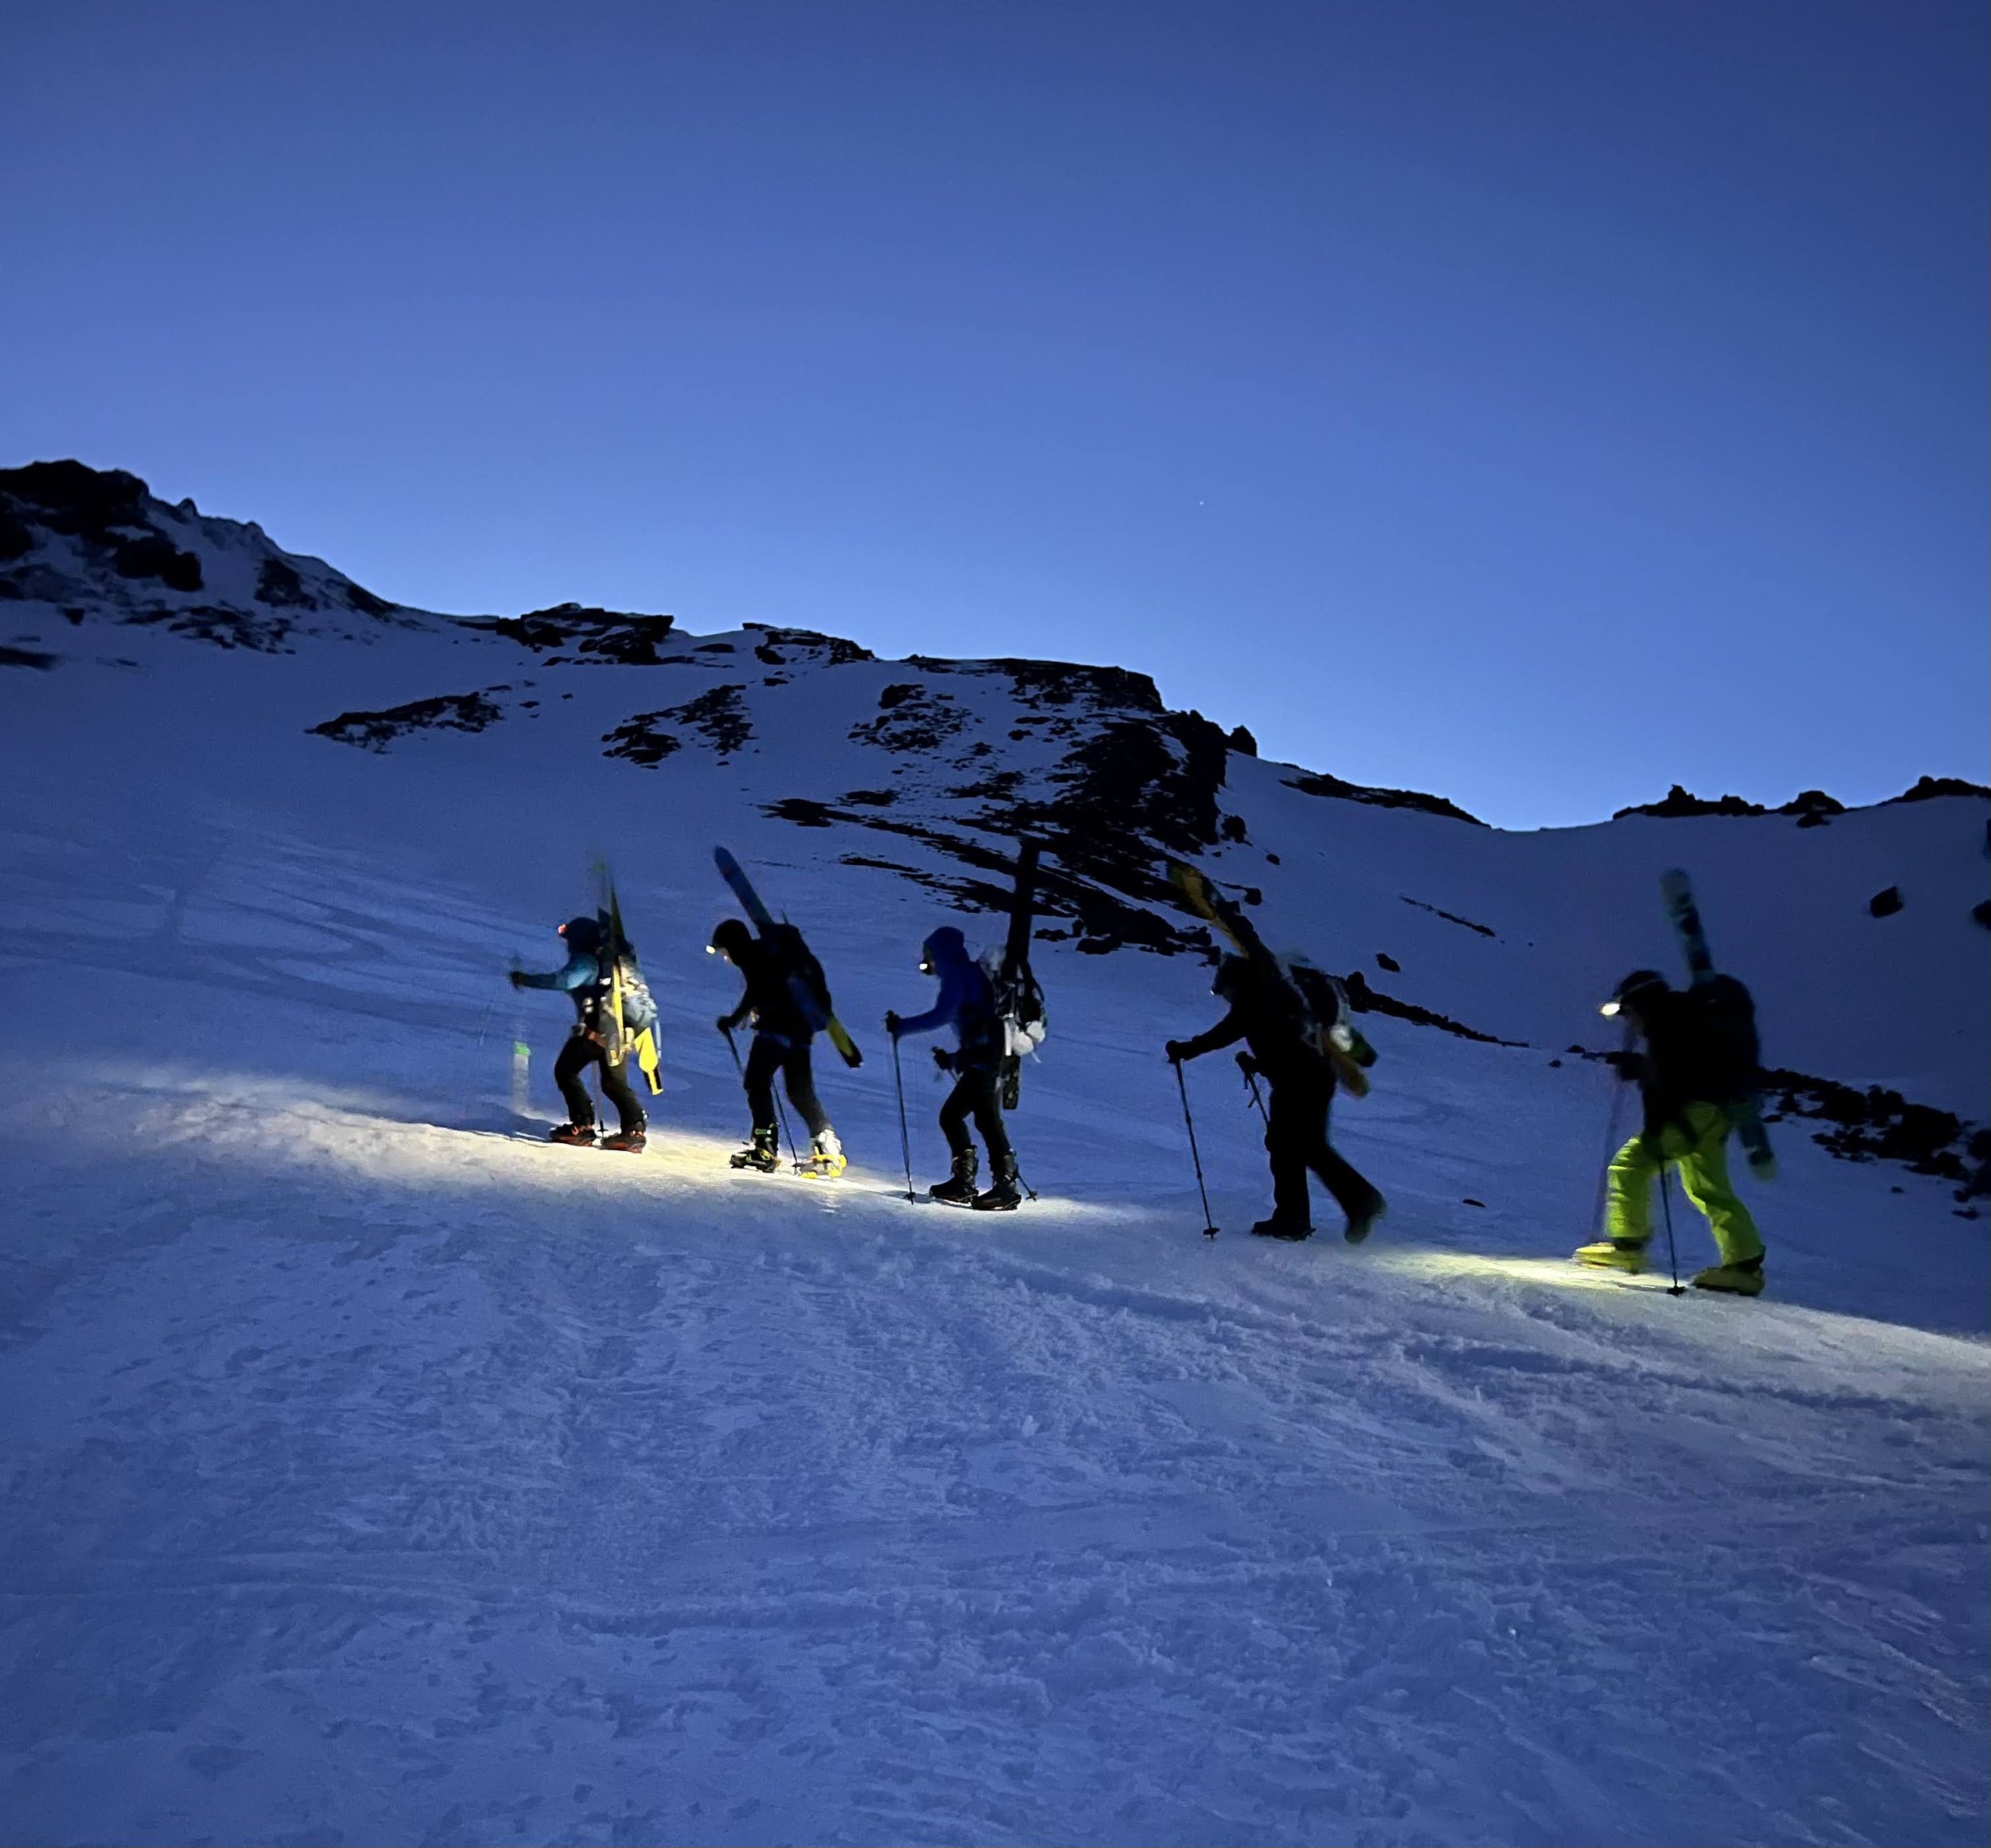 Backcountry skiers during sunset of an alpine start